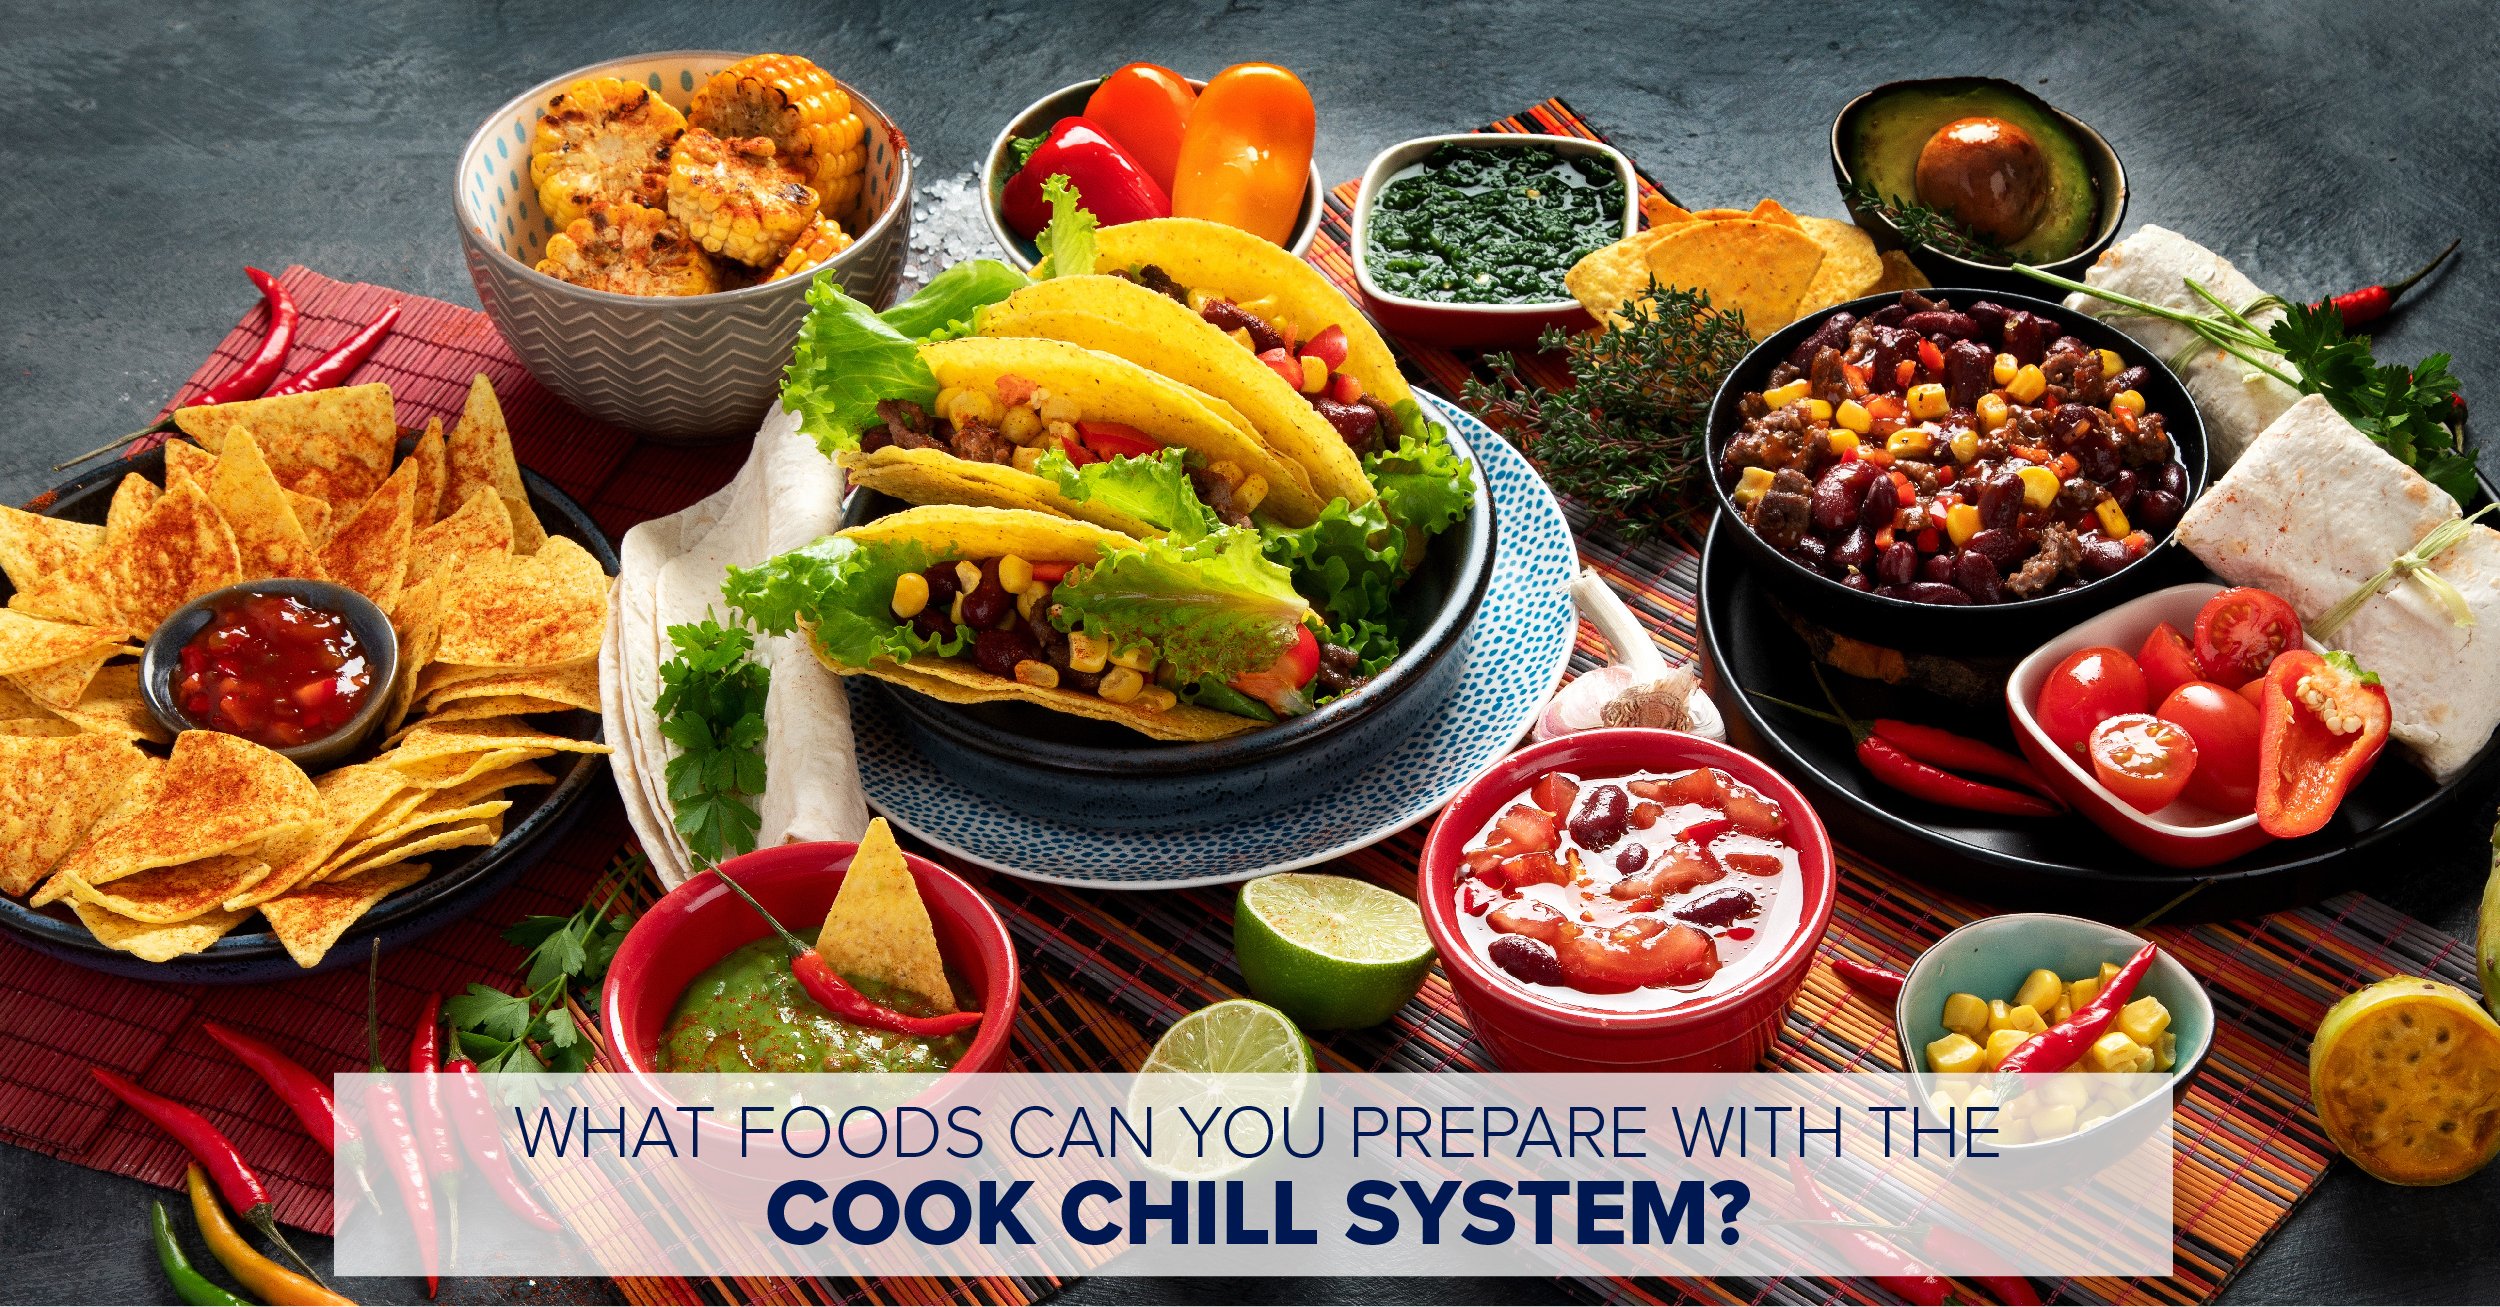 WHAT CAN YOU MAKE WITH THE COOK CHILL SYSTEM